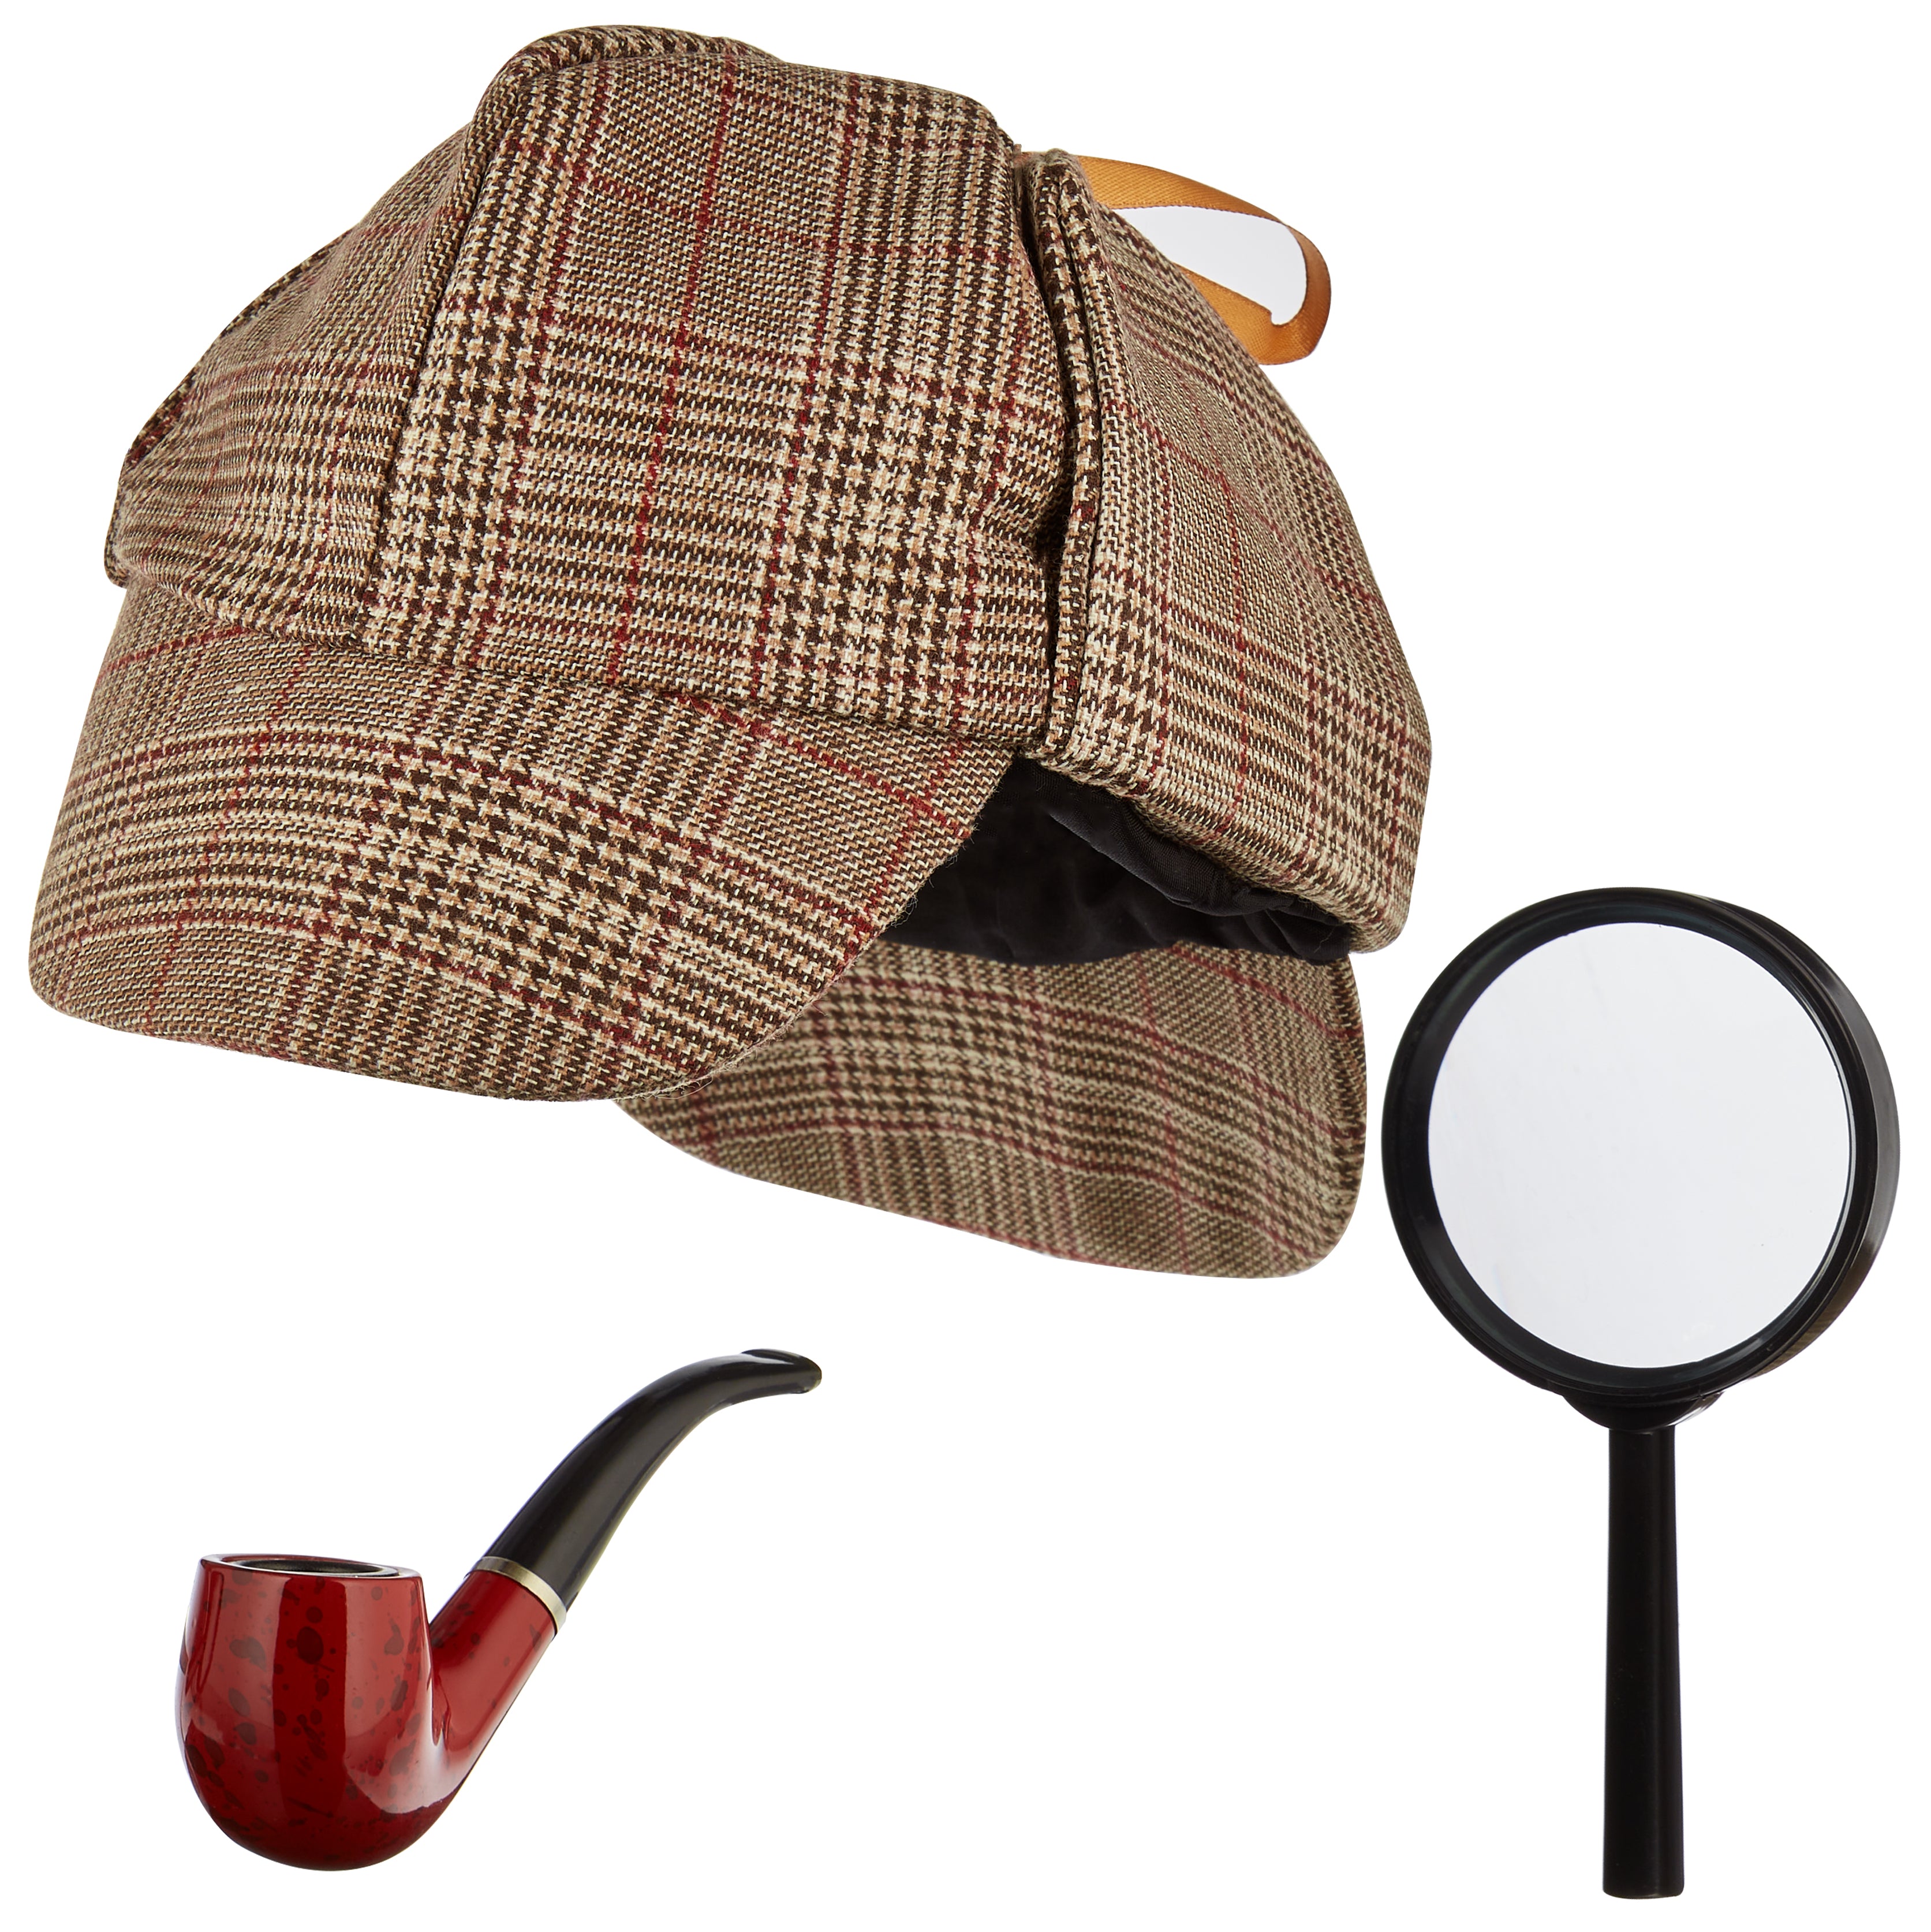 Great Detective Accessory Kit